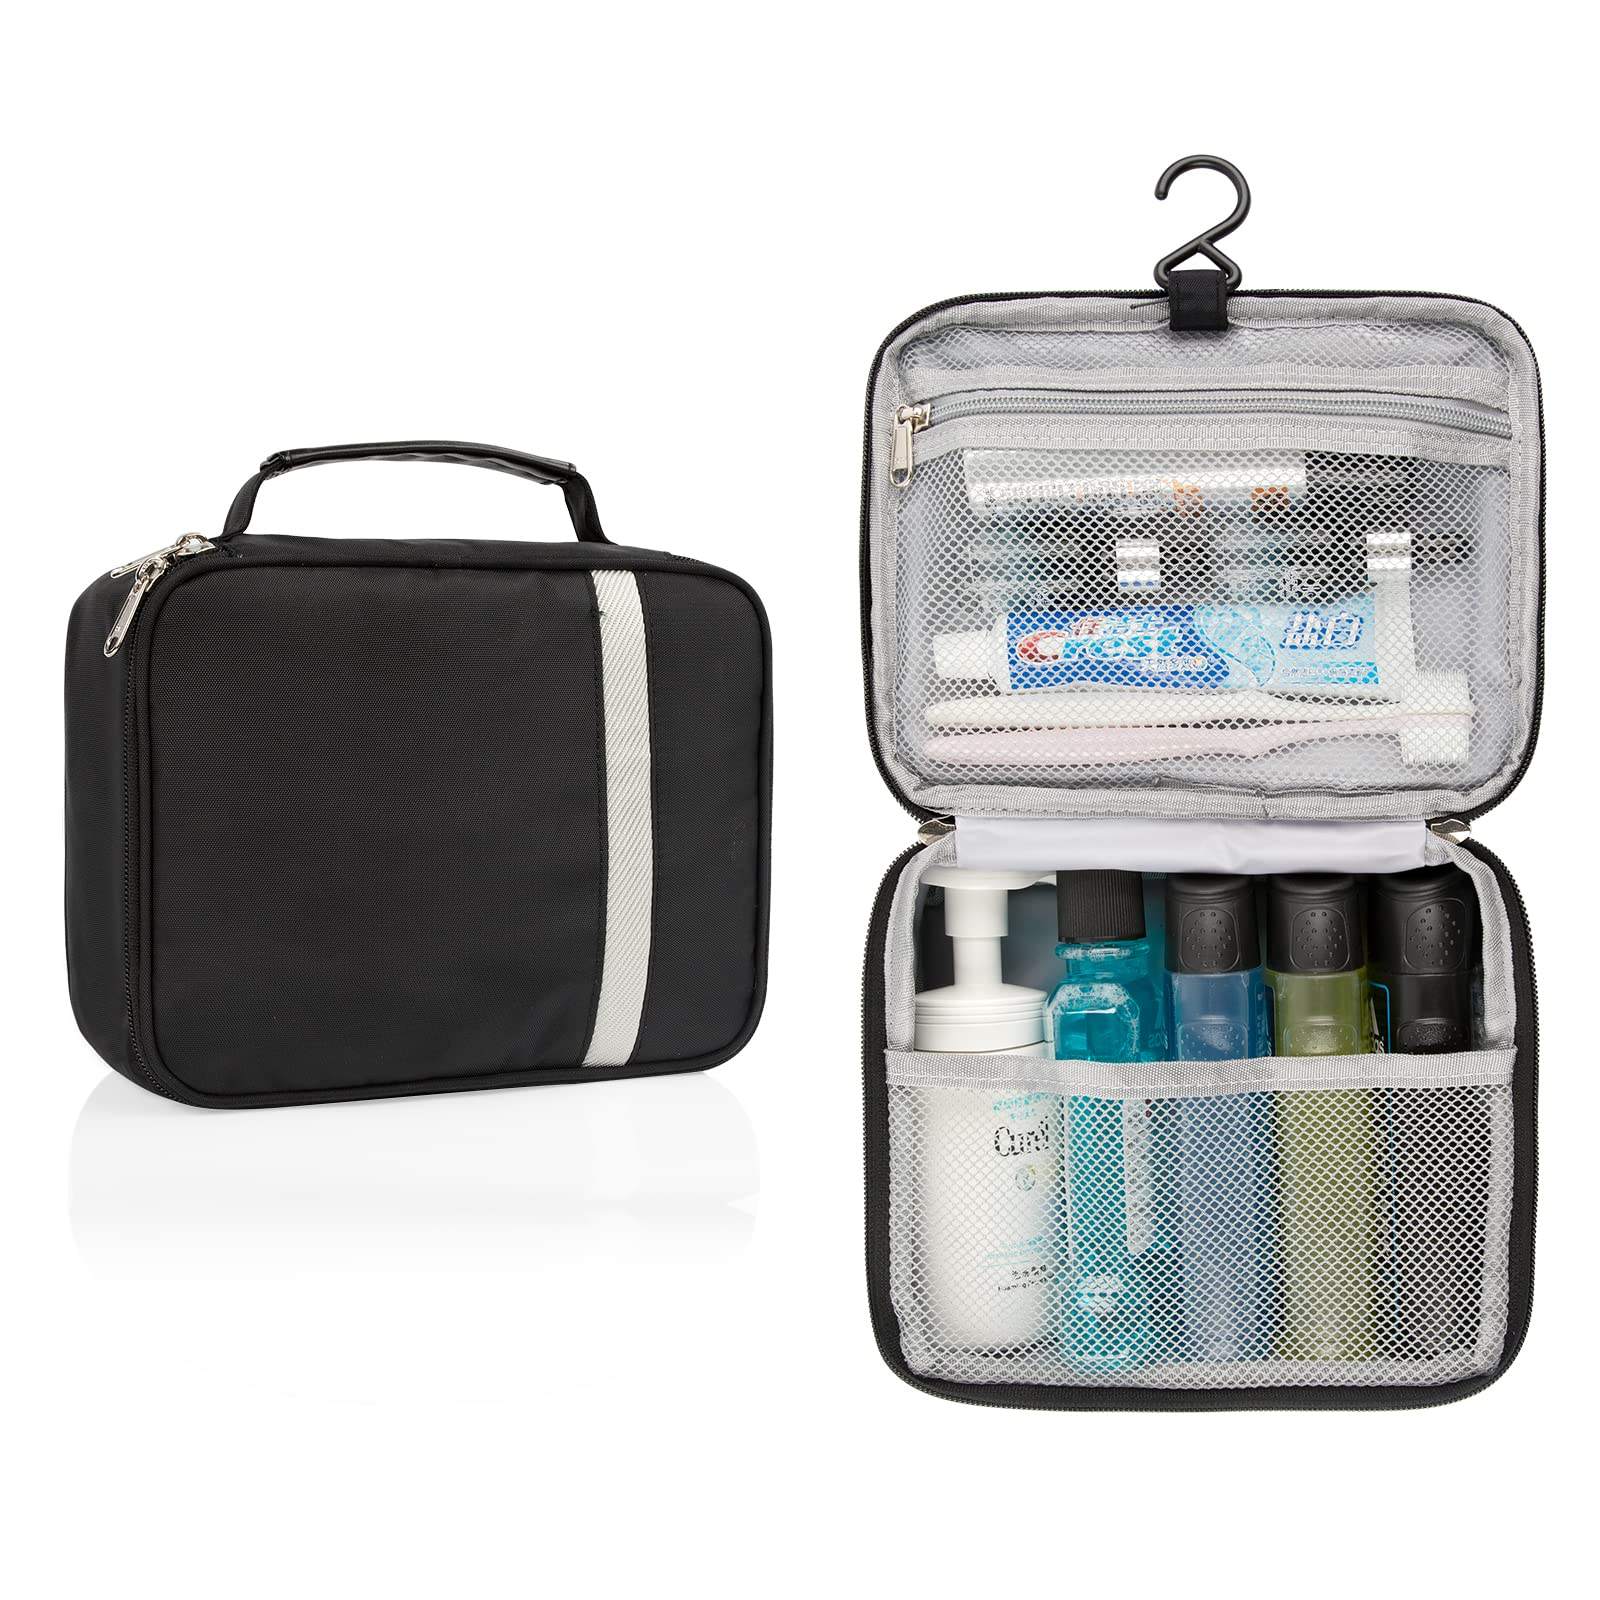 WellPromotion Folding Travel Toiletry Bag